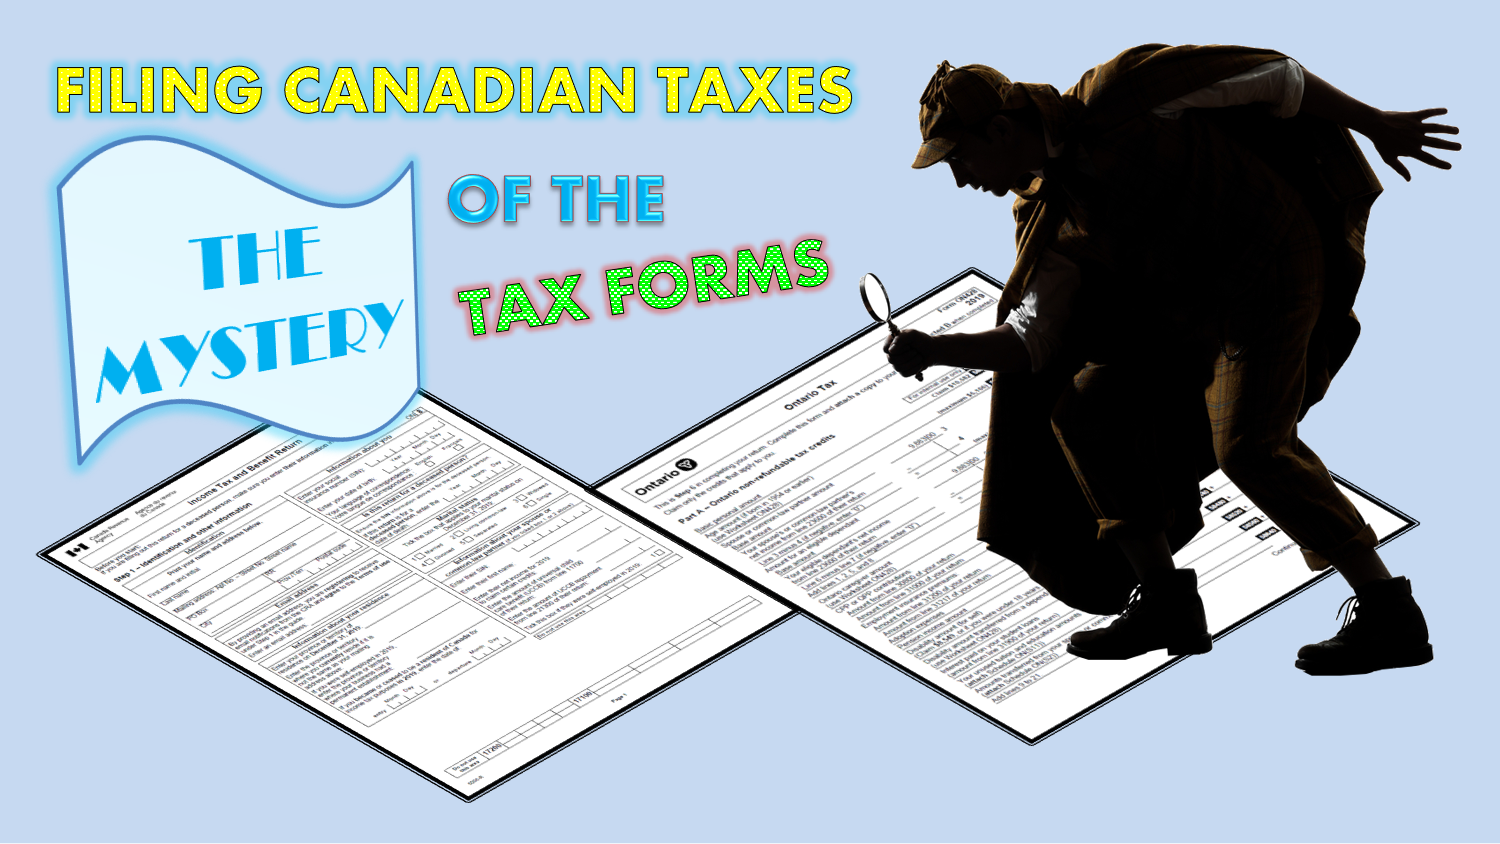 FILING CANADIAN TAXES